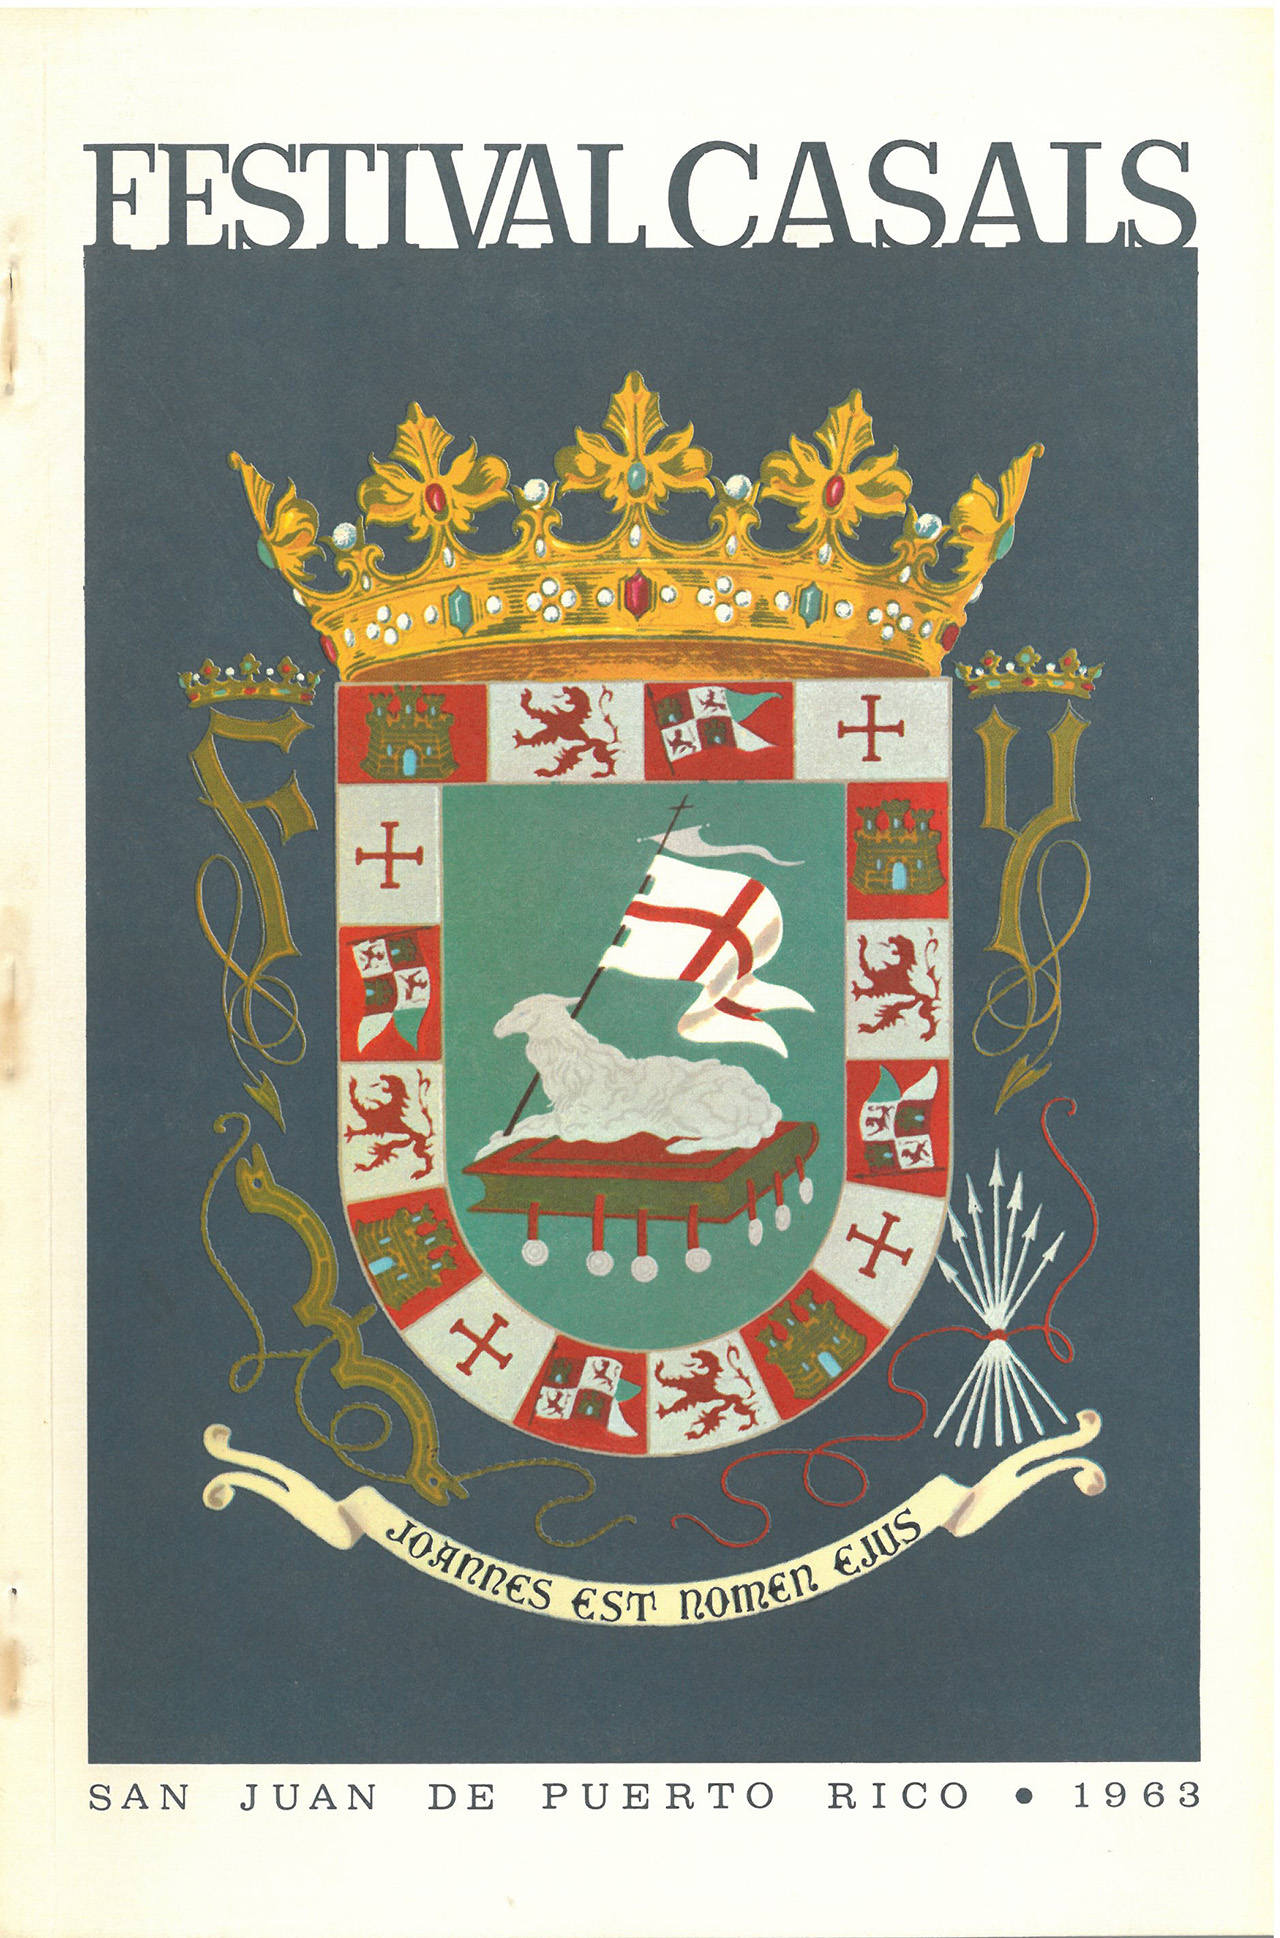 A program cover, in an older heraldic design, for the 1963 Festival Casals.